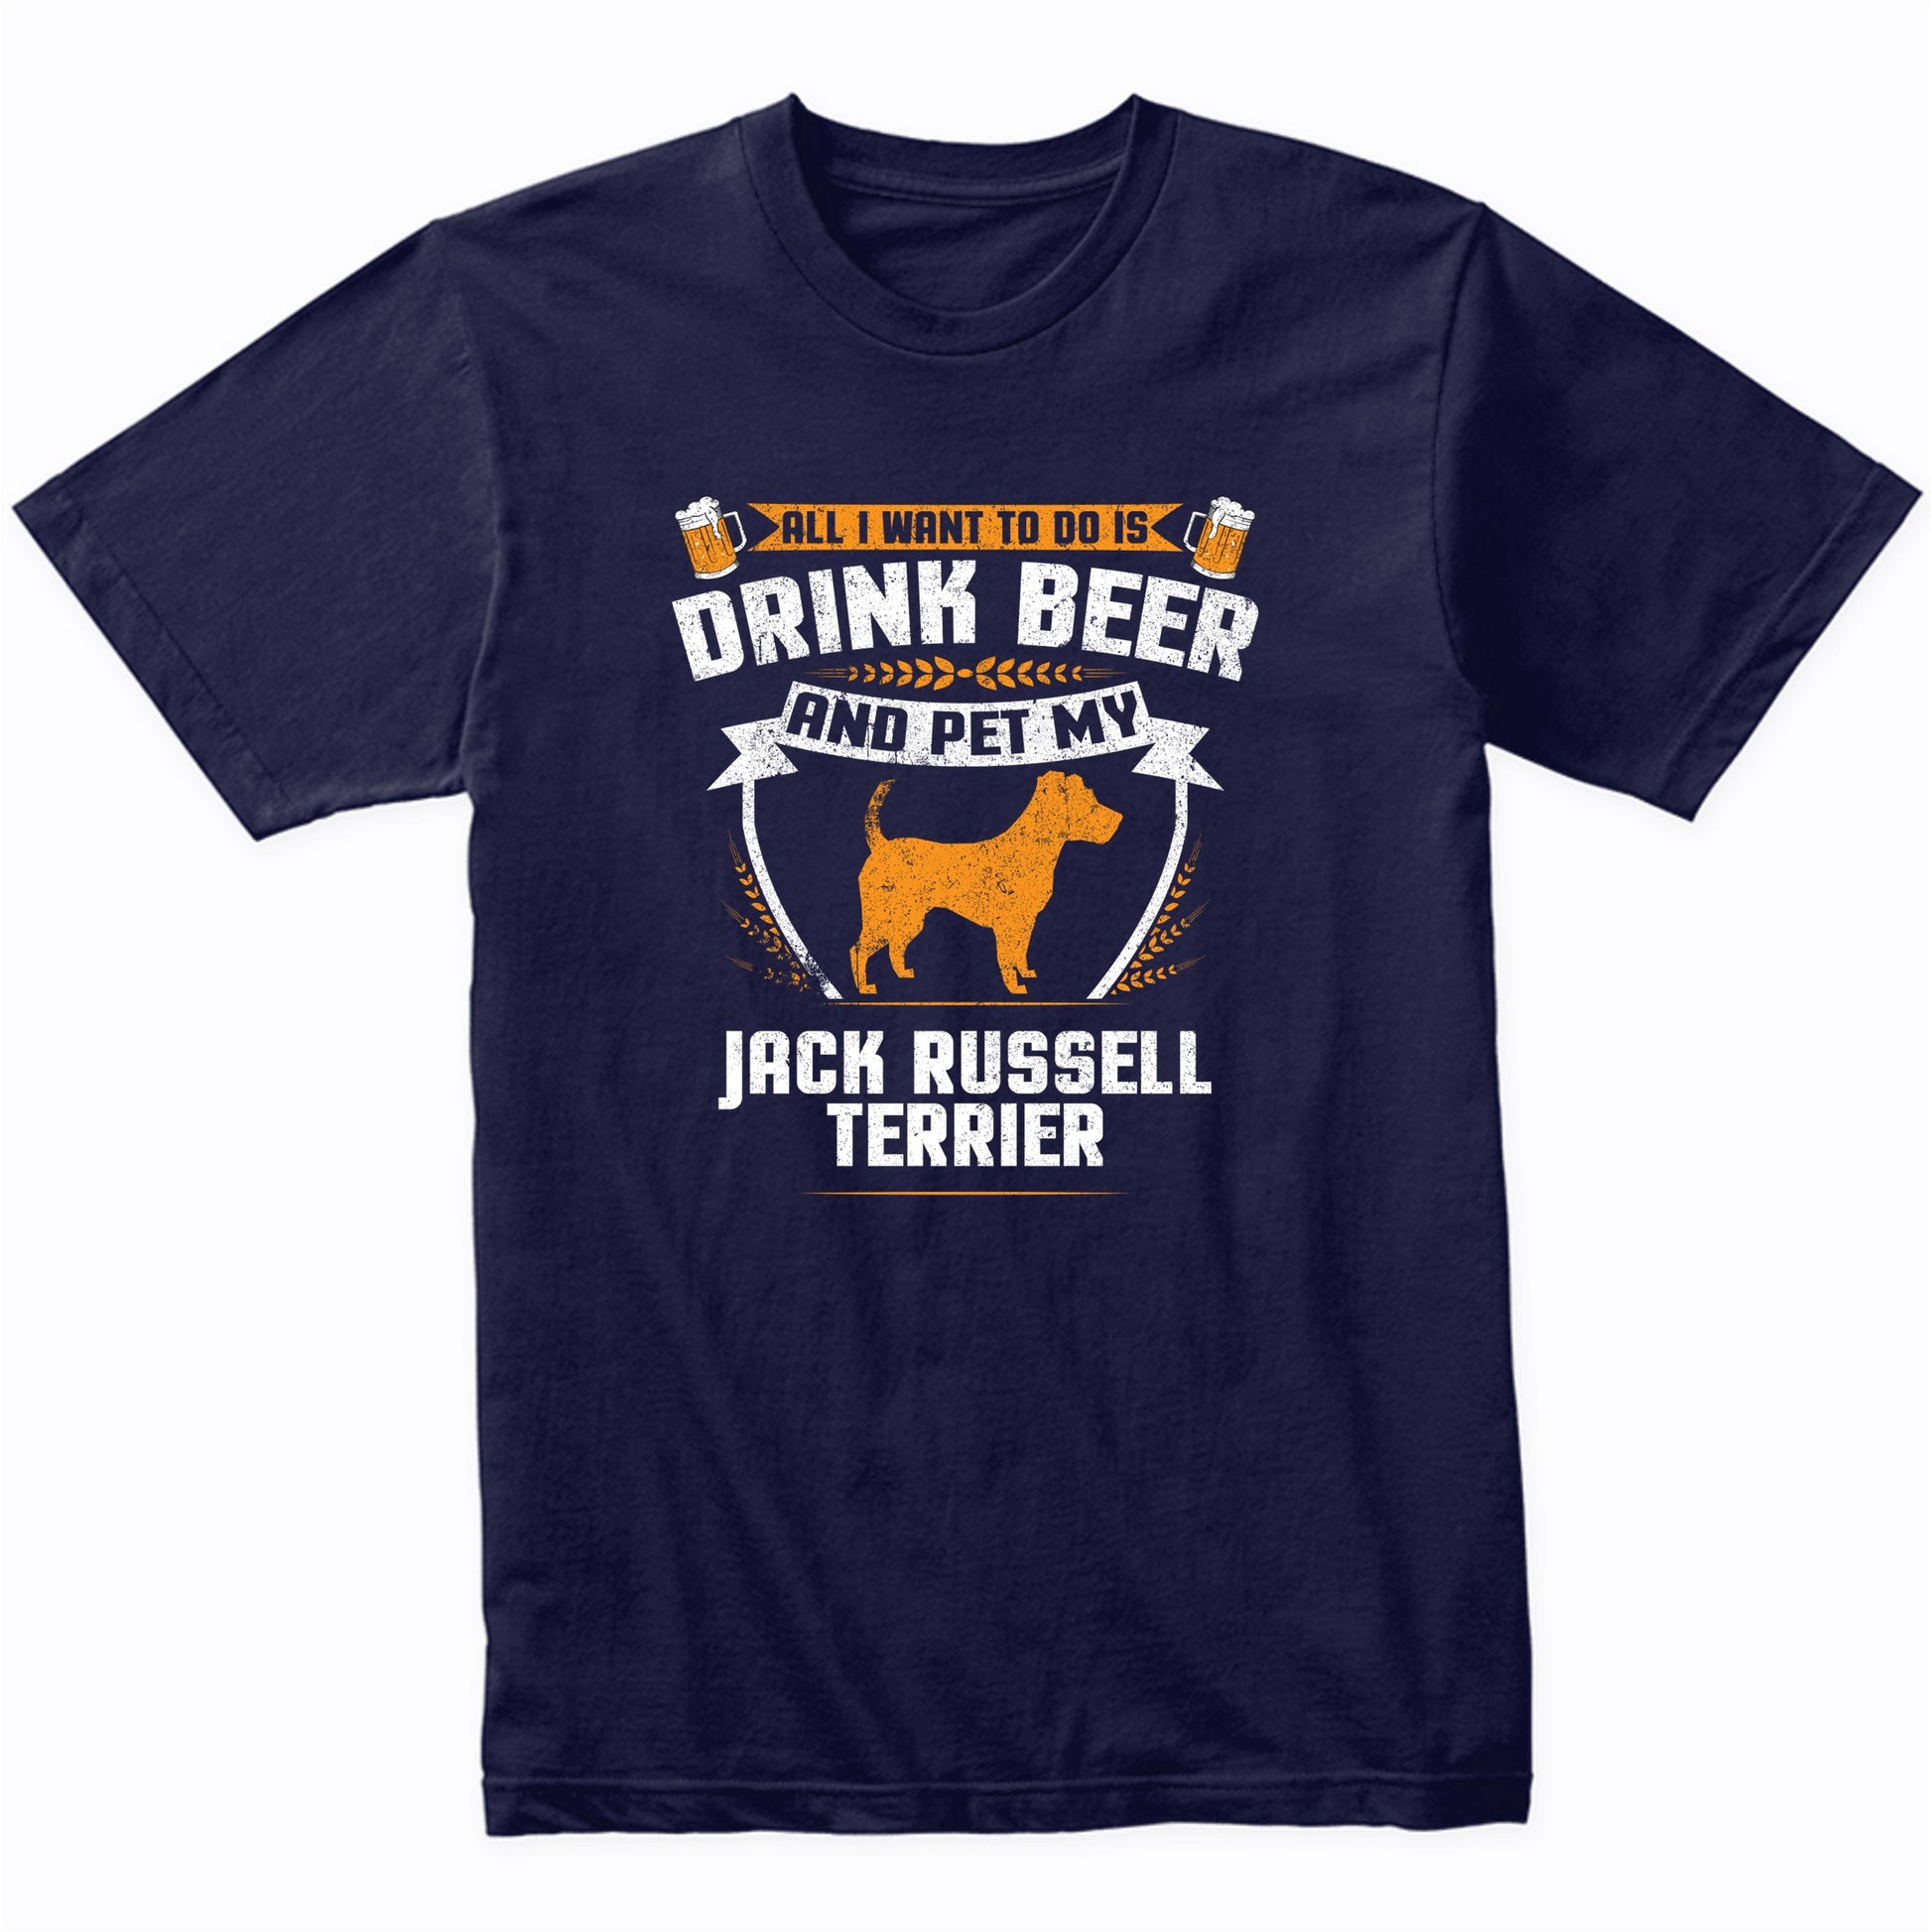 All I Want To Do Is Drink Beer And Pet My Jack Russell Terrier Funny Dog Owner Shirt